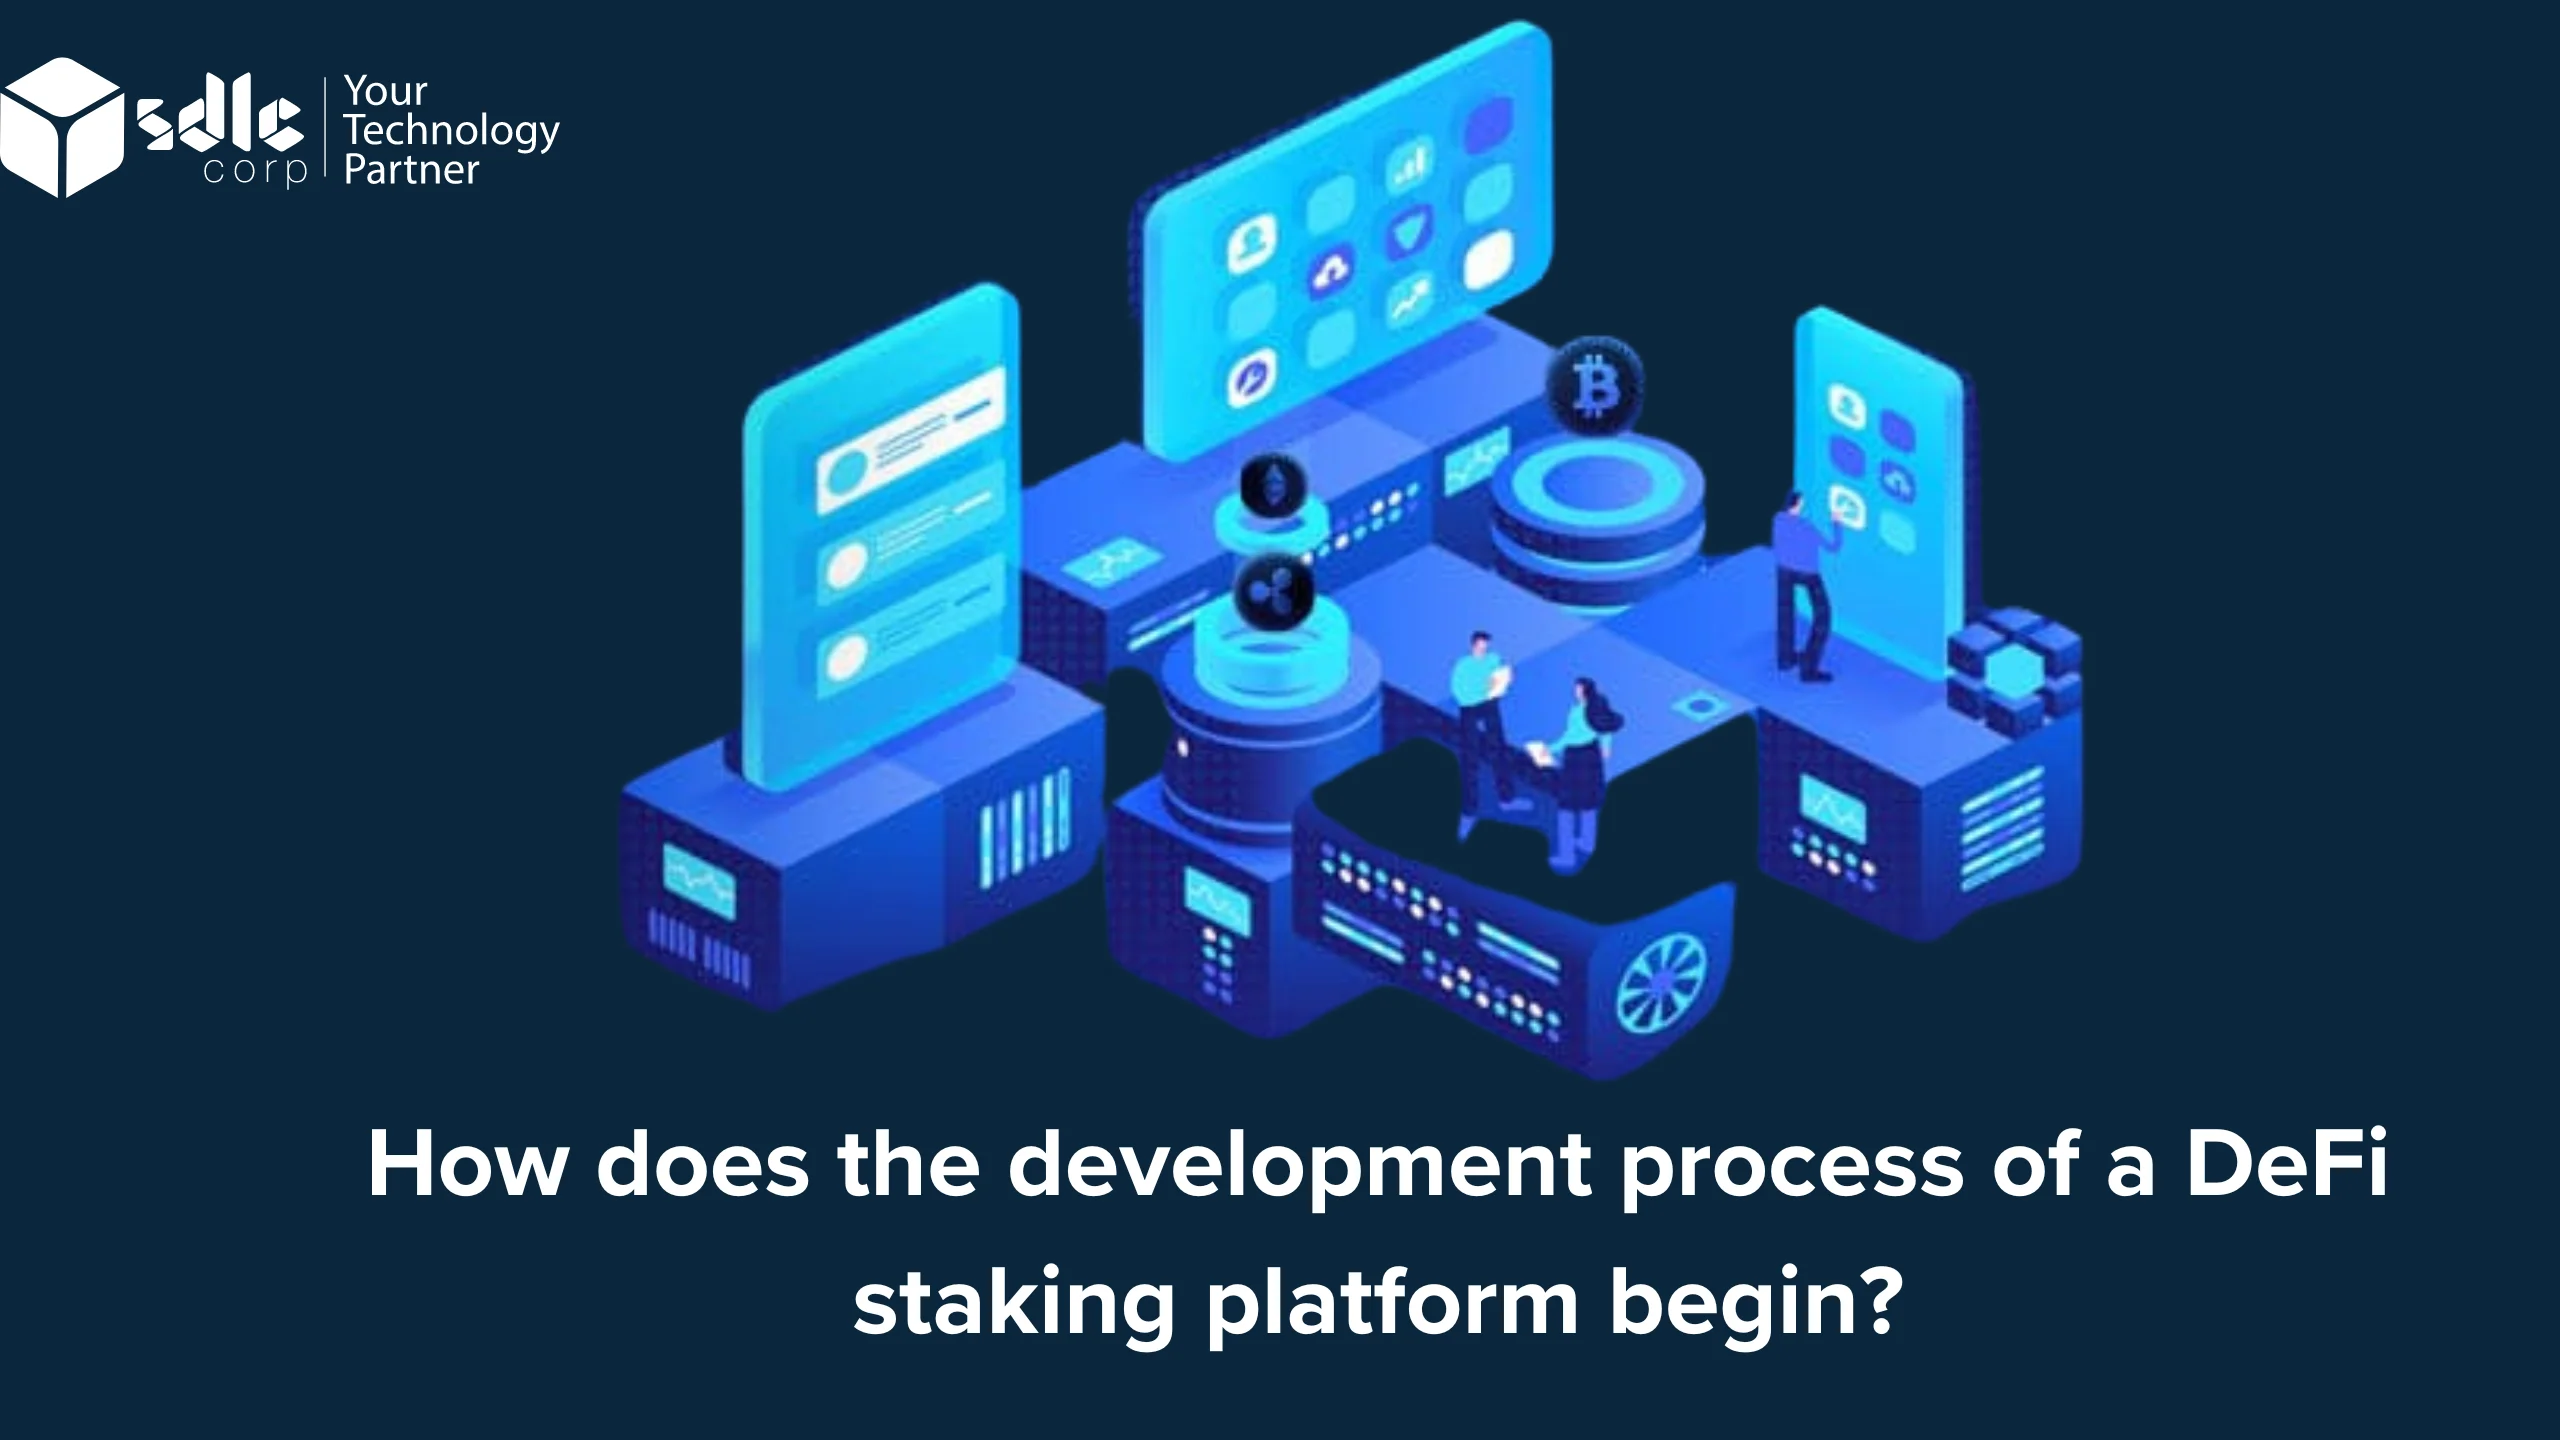 How does the development process of a DeFi staking platform begin?